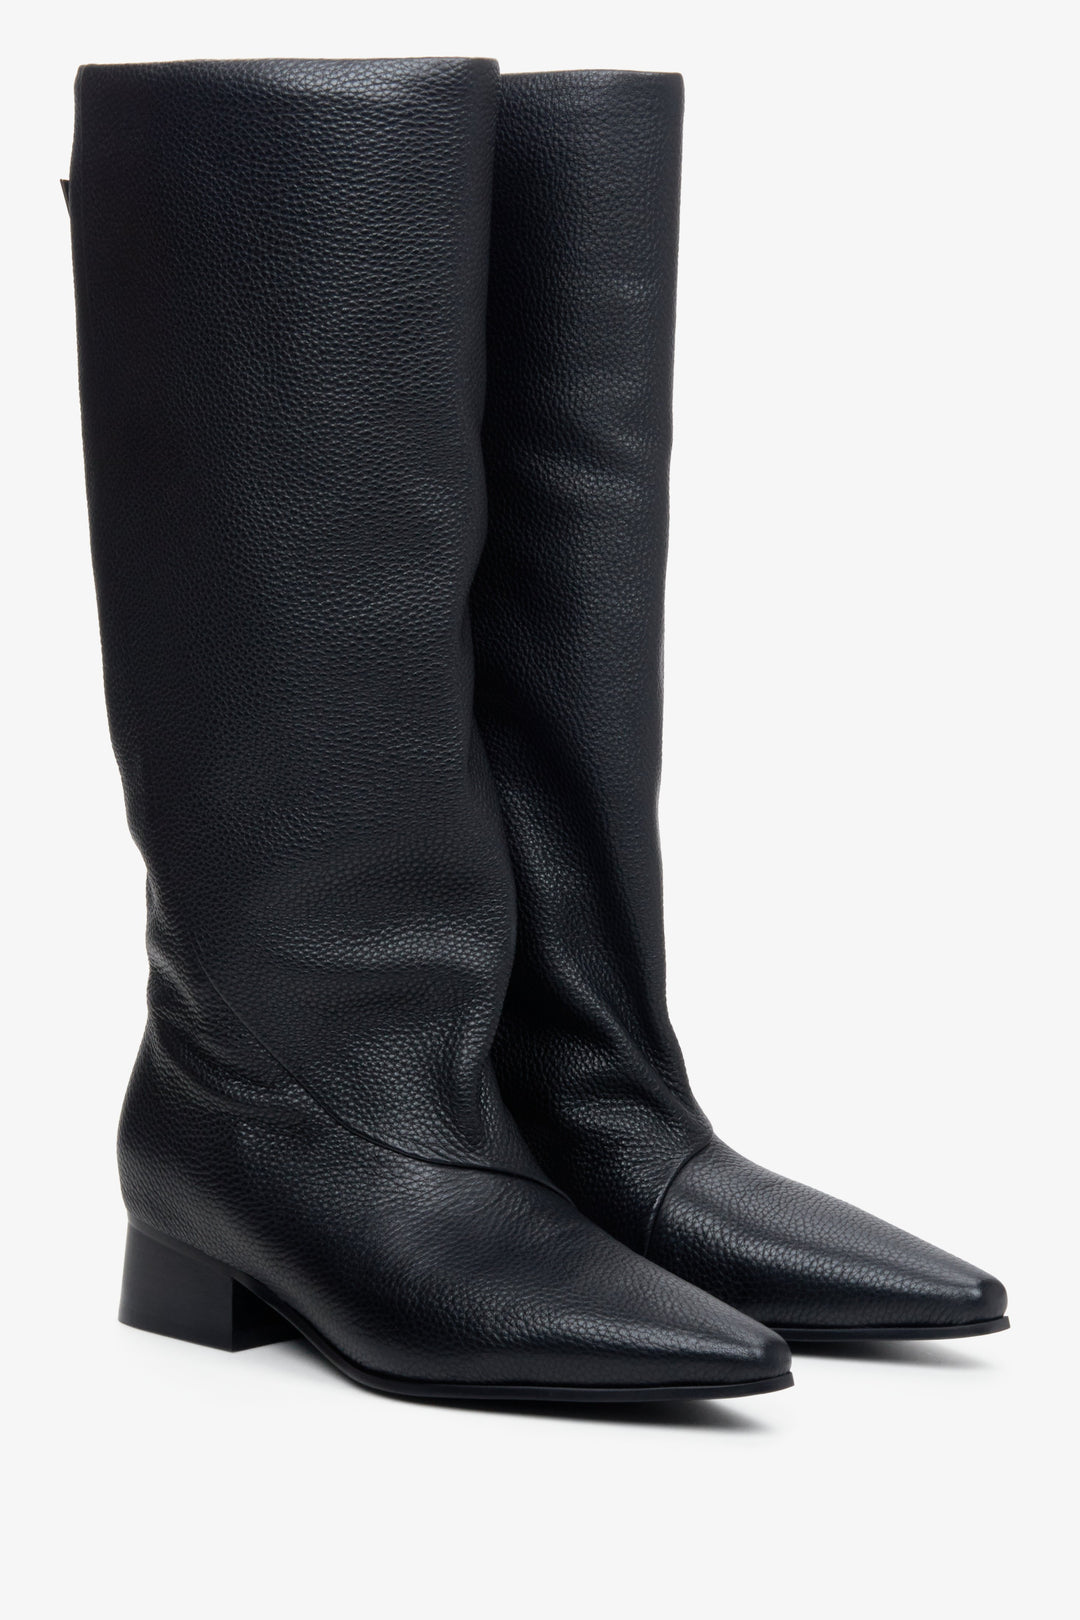 Women's black wide shaft boots made of genuine leather by Estro.